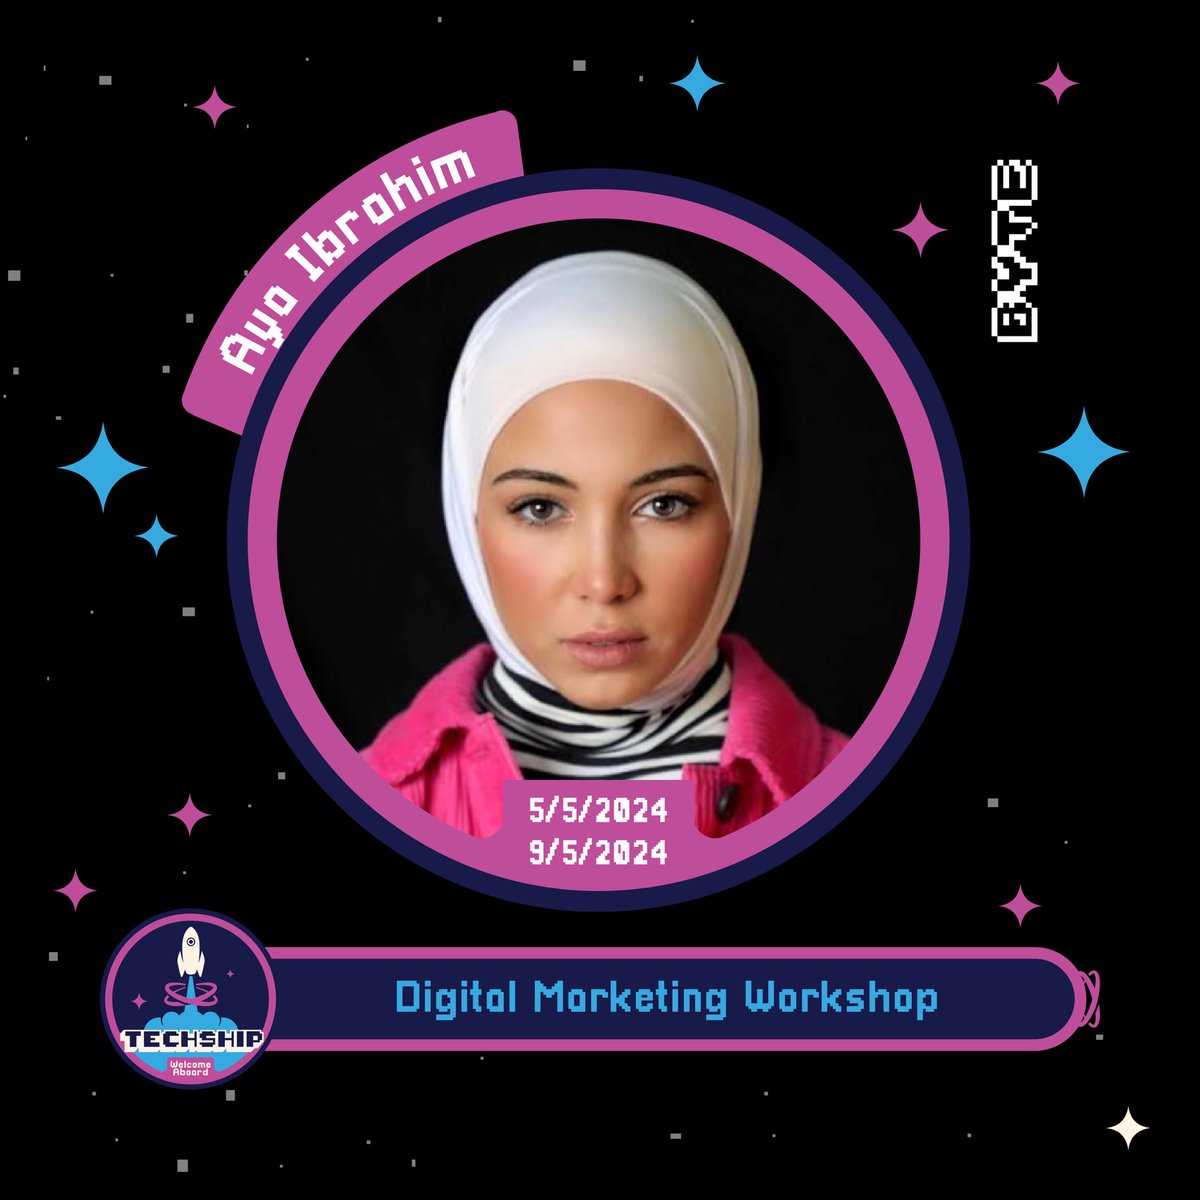 TechShip 1st Trip 🚀 
Digital Marketing 
🎙️ Lead by: Aya Ibrahim 
🗓️ Date: Sunday 5th of May - Thursday 9th of May 
🕟 Time: 4:30 PM - 8:00 PM 

#TechShip🚀 
Welcome Aboard!

Funded by US State Department through Alumni Engagement Innovation Fund (AEIF)